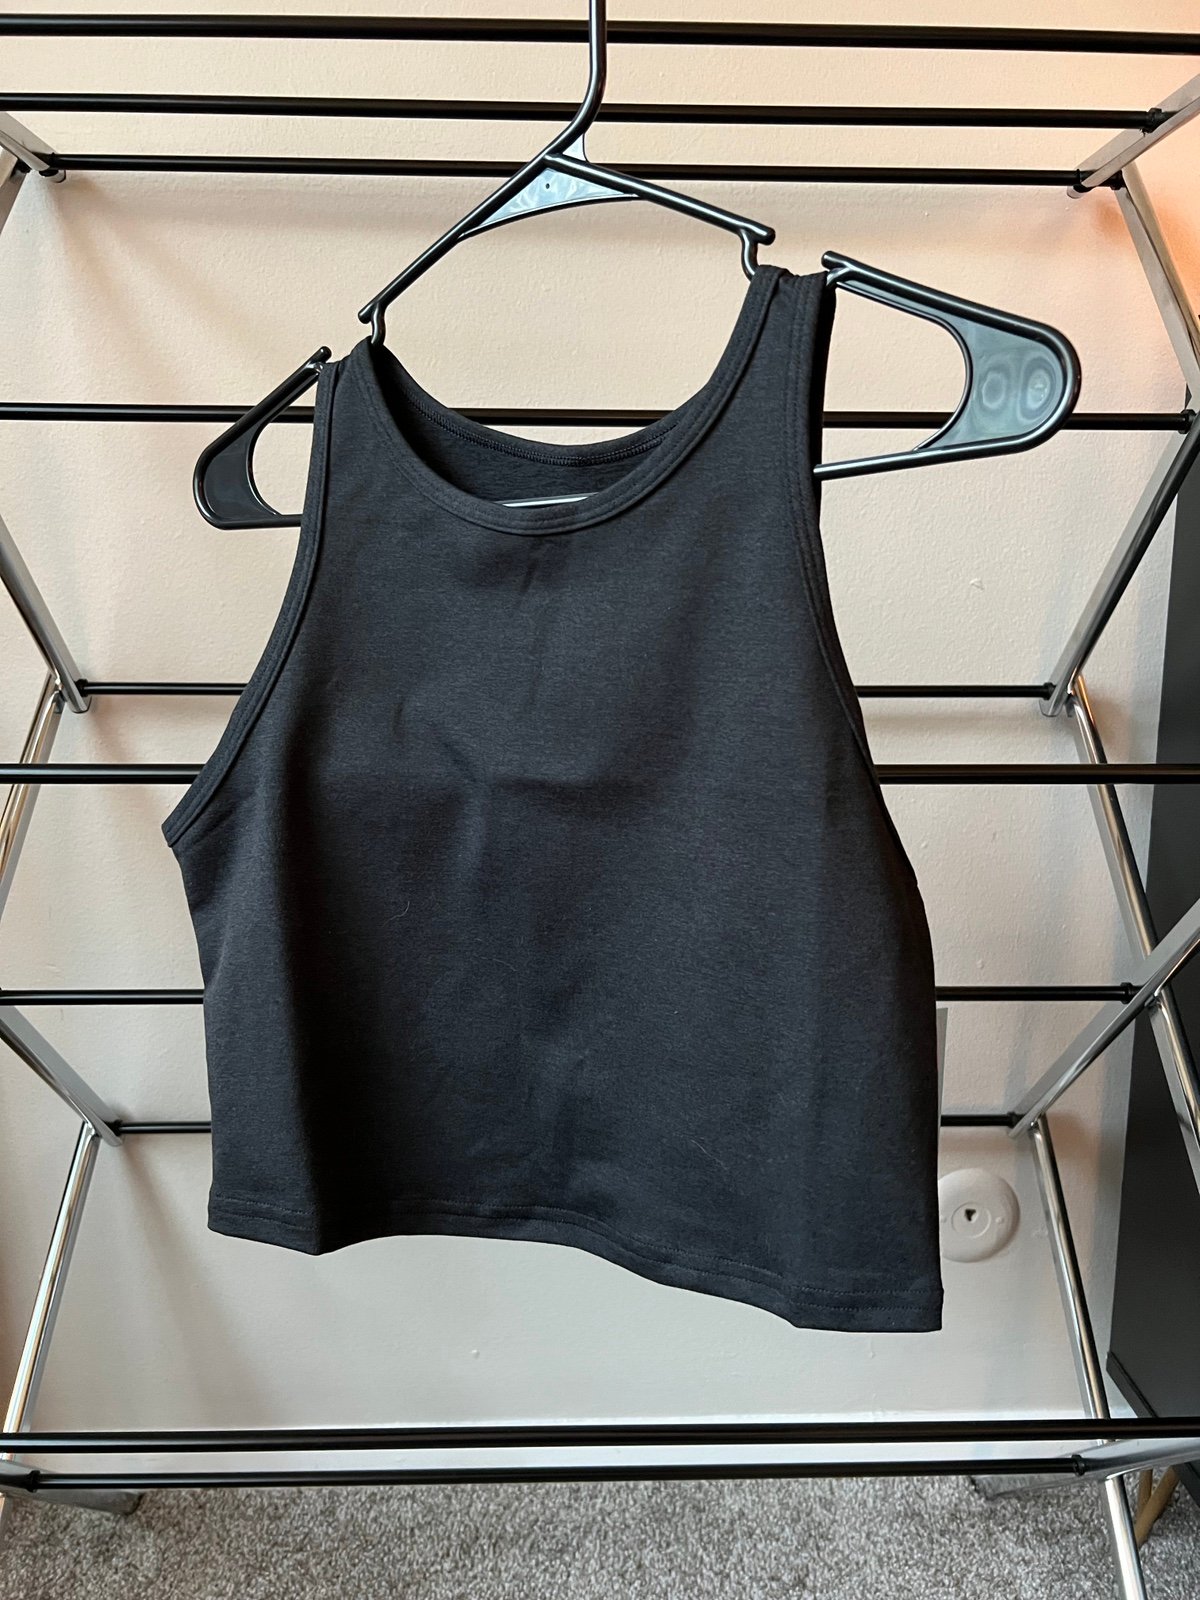 Perfect NWT Black Fleo Cropped Tank p5KzL6hpZ for sale